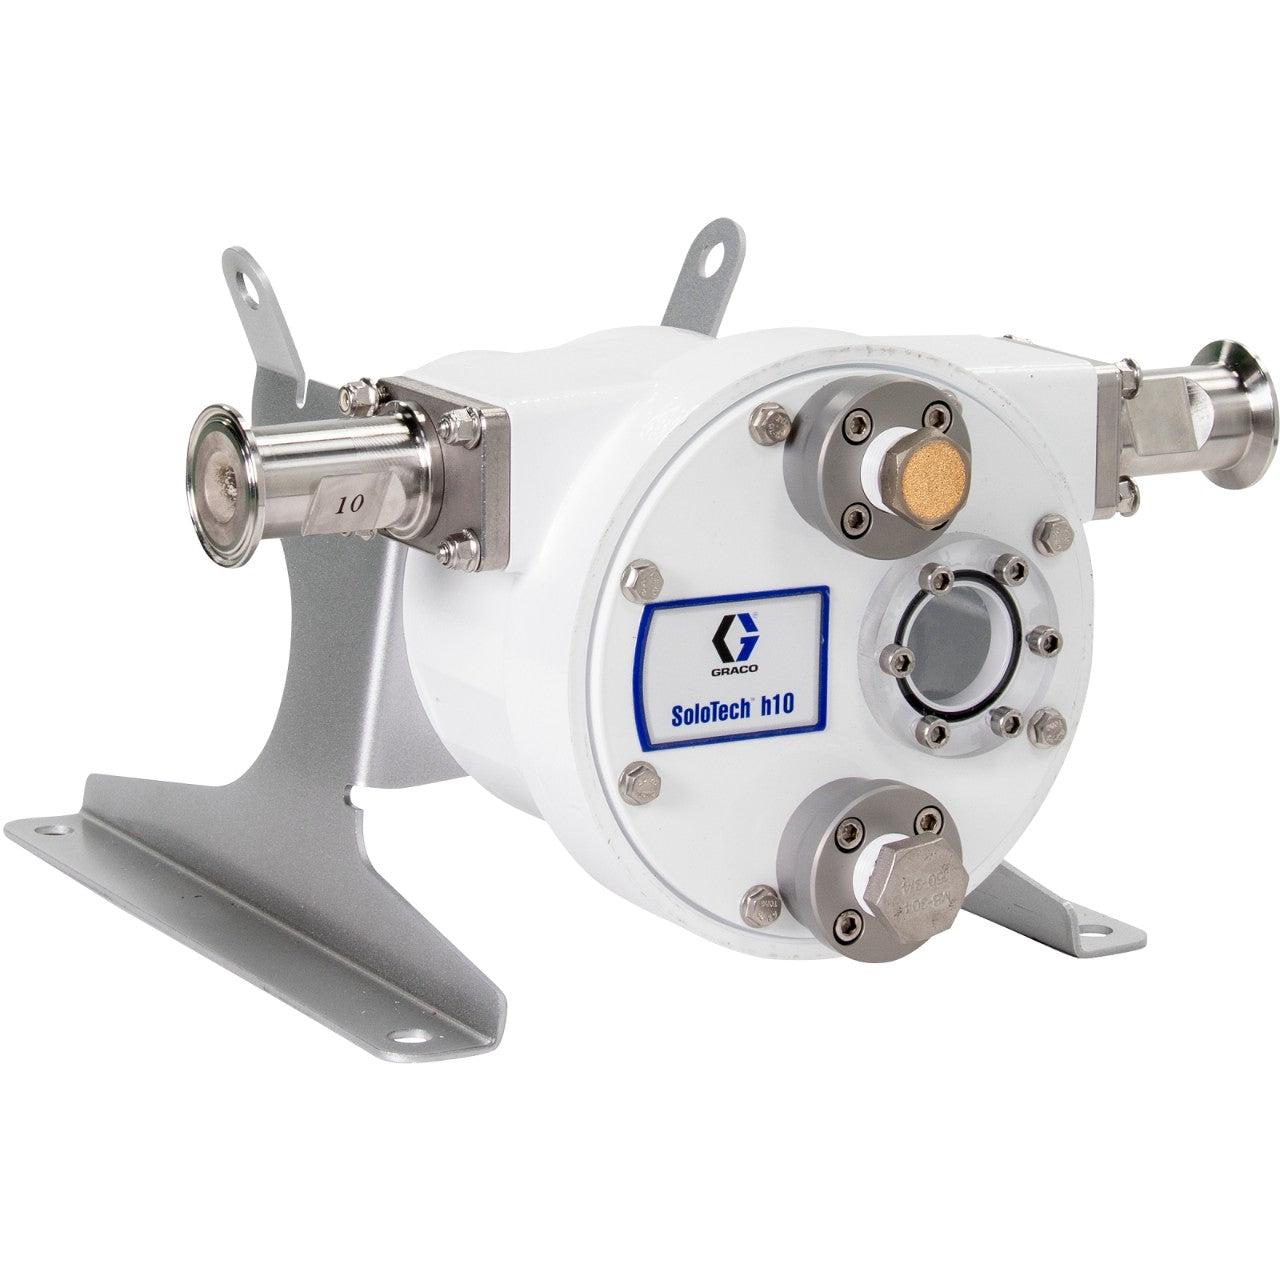 SoloTechª h16 Peristaltic Pump, No Motor or gear reducer, FDA Nitrile Hose, SST Sanitary Clamp Barb